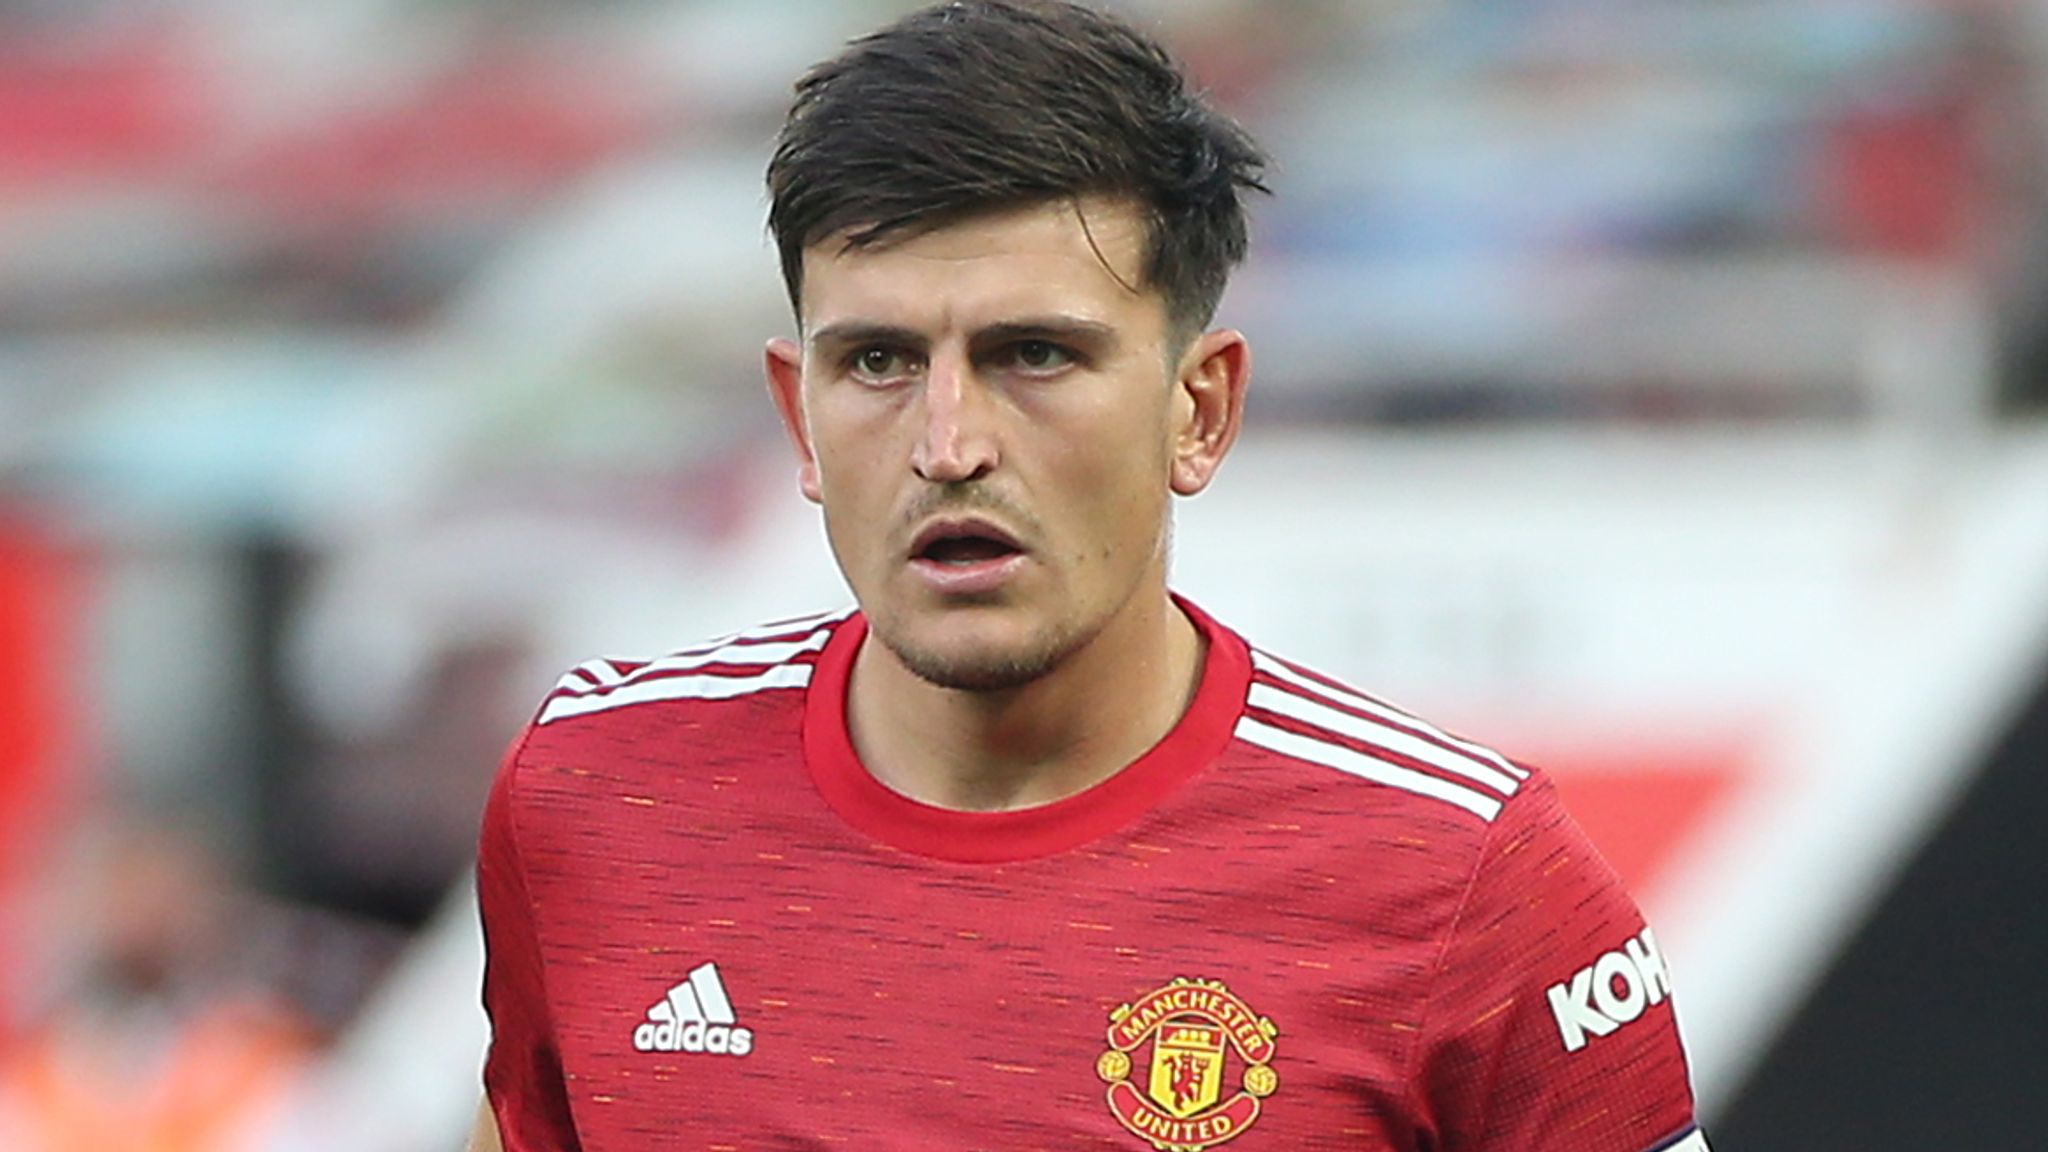 Harry Maguire: Manchester United defender says he looks out for team-mates  suffering online hate | Football News | Sky Sports